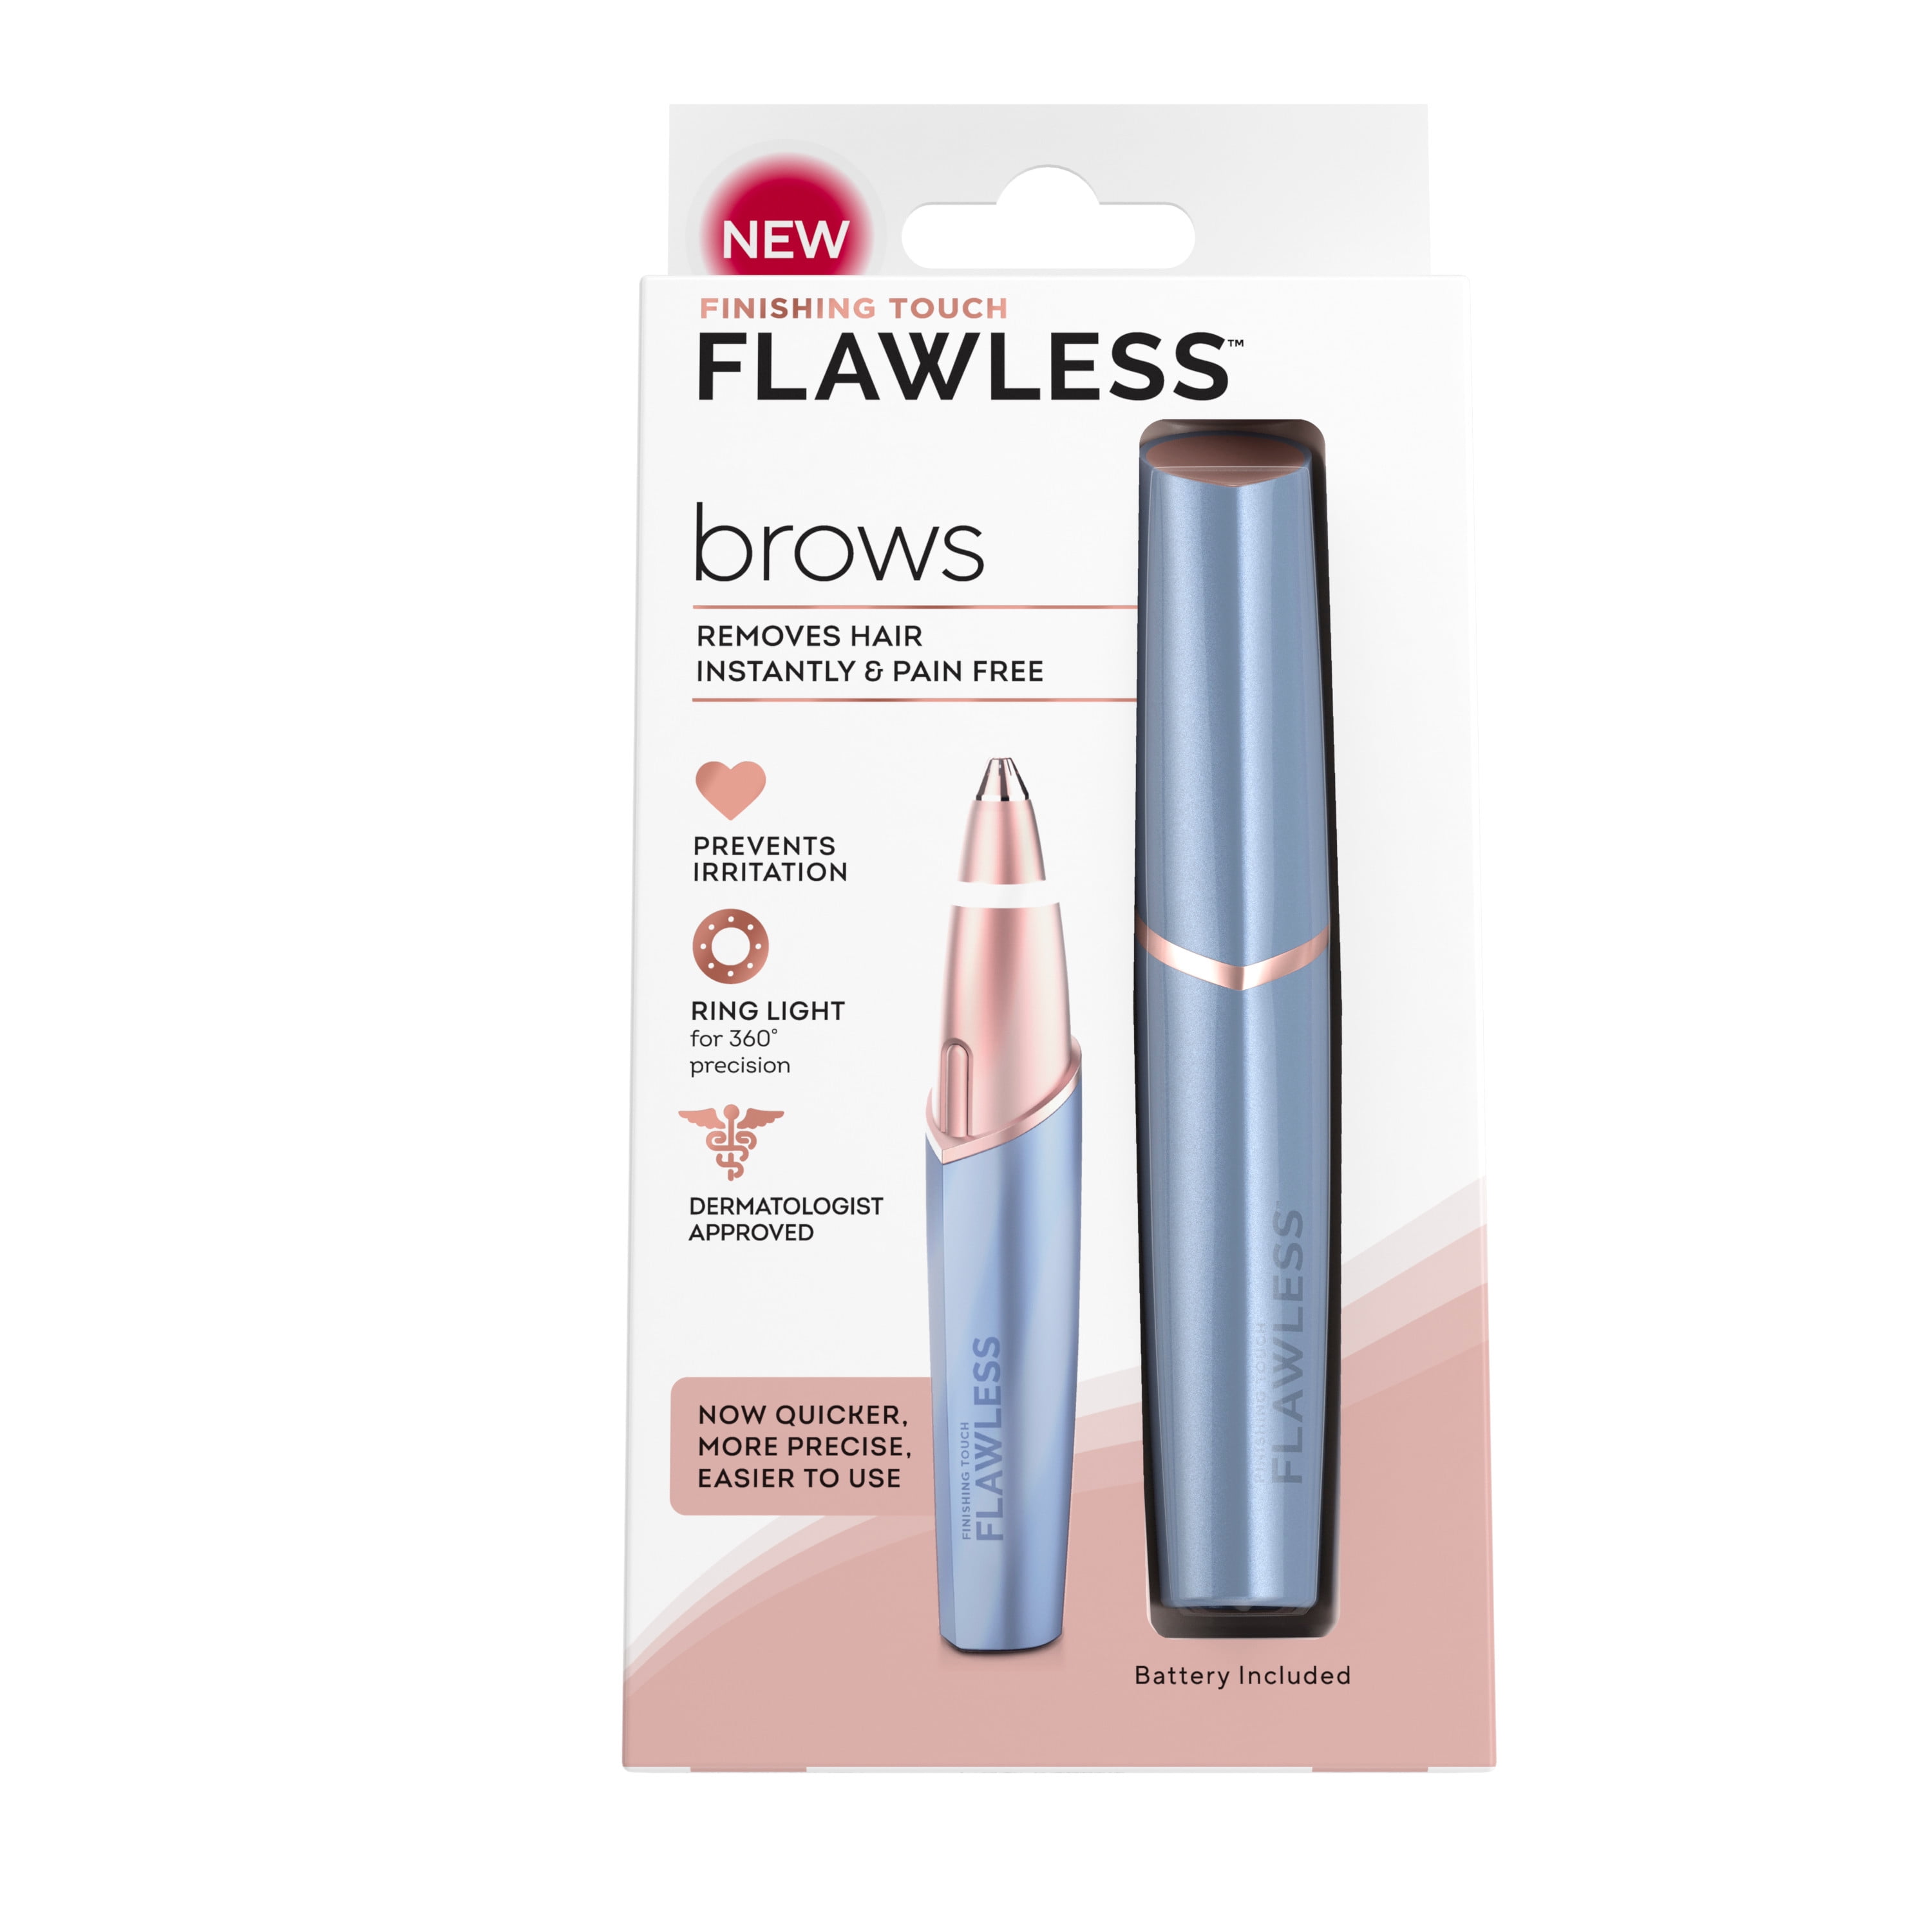 Finishing Touch Flawless Brows Eyebrow Hair Remover for Women, Electric  Eyebrow Razor for Women with LED Light for Instant and Painless Hair  Removal, Parisian Blue